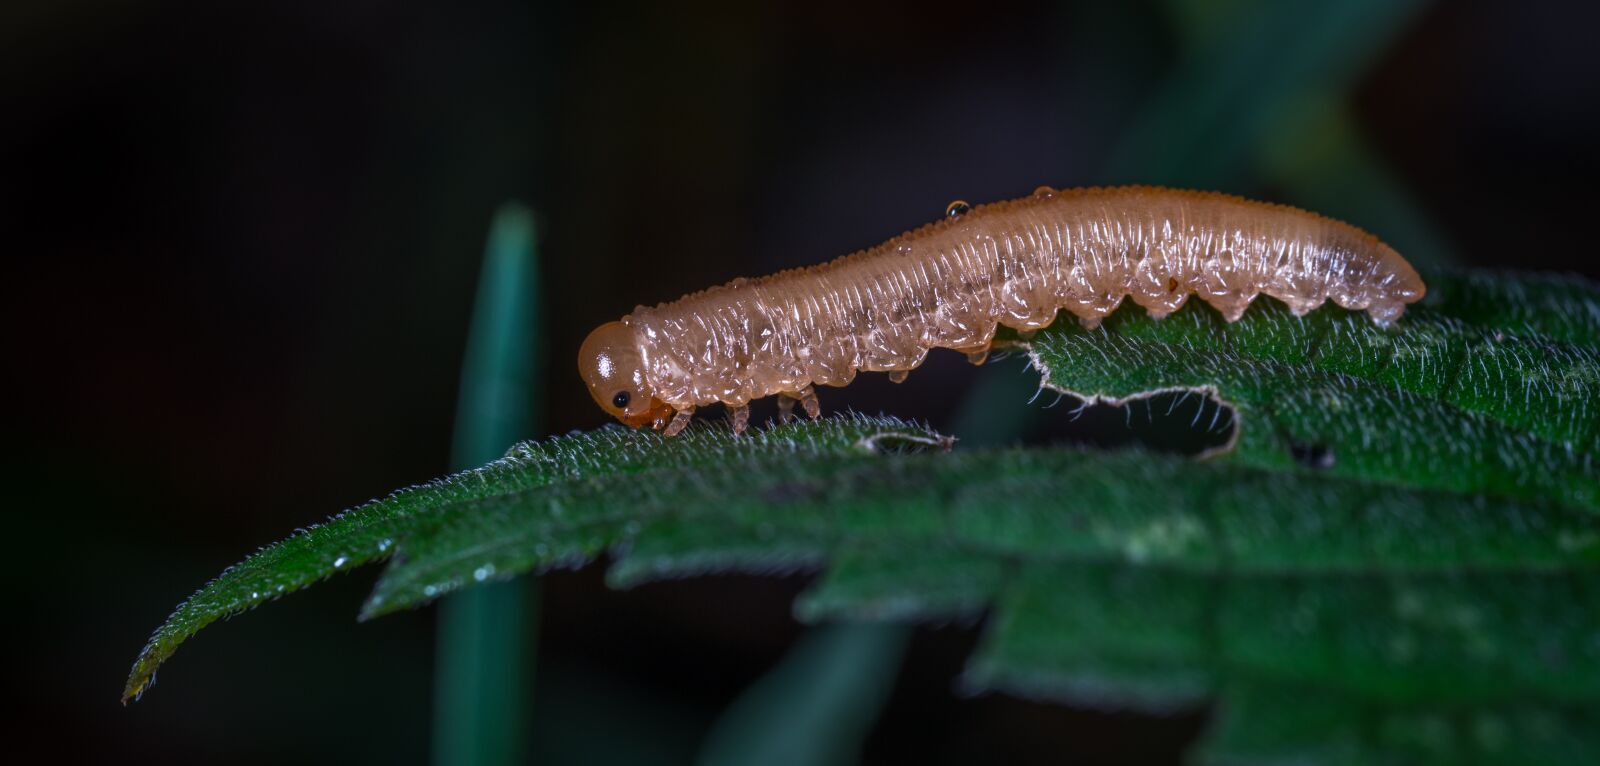 Sony a7R II sample photo. Larva, caterpillar, insect photography